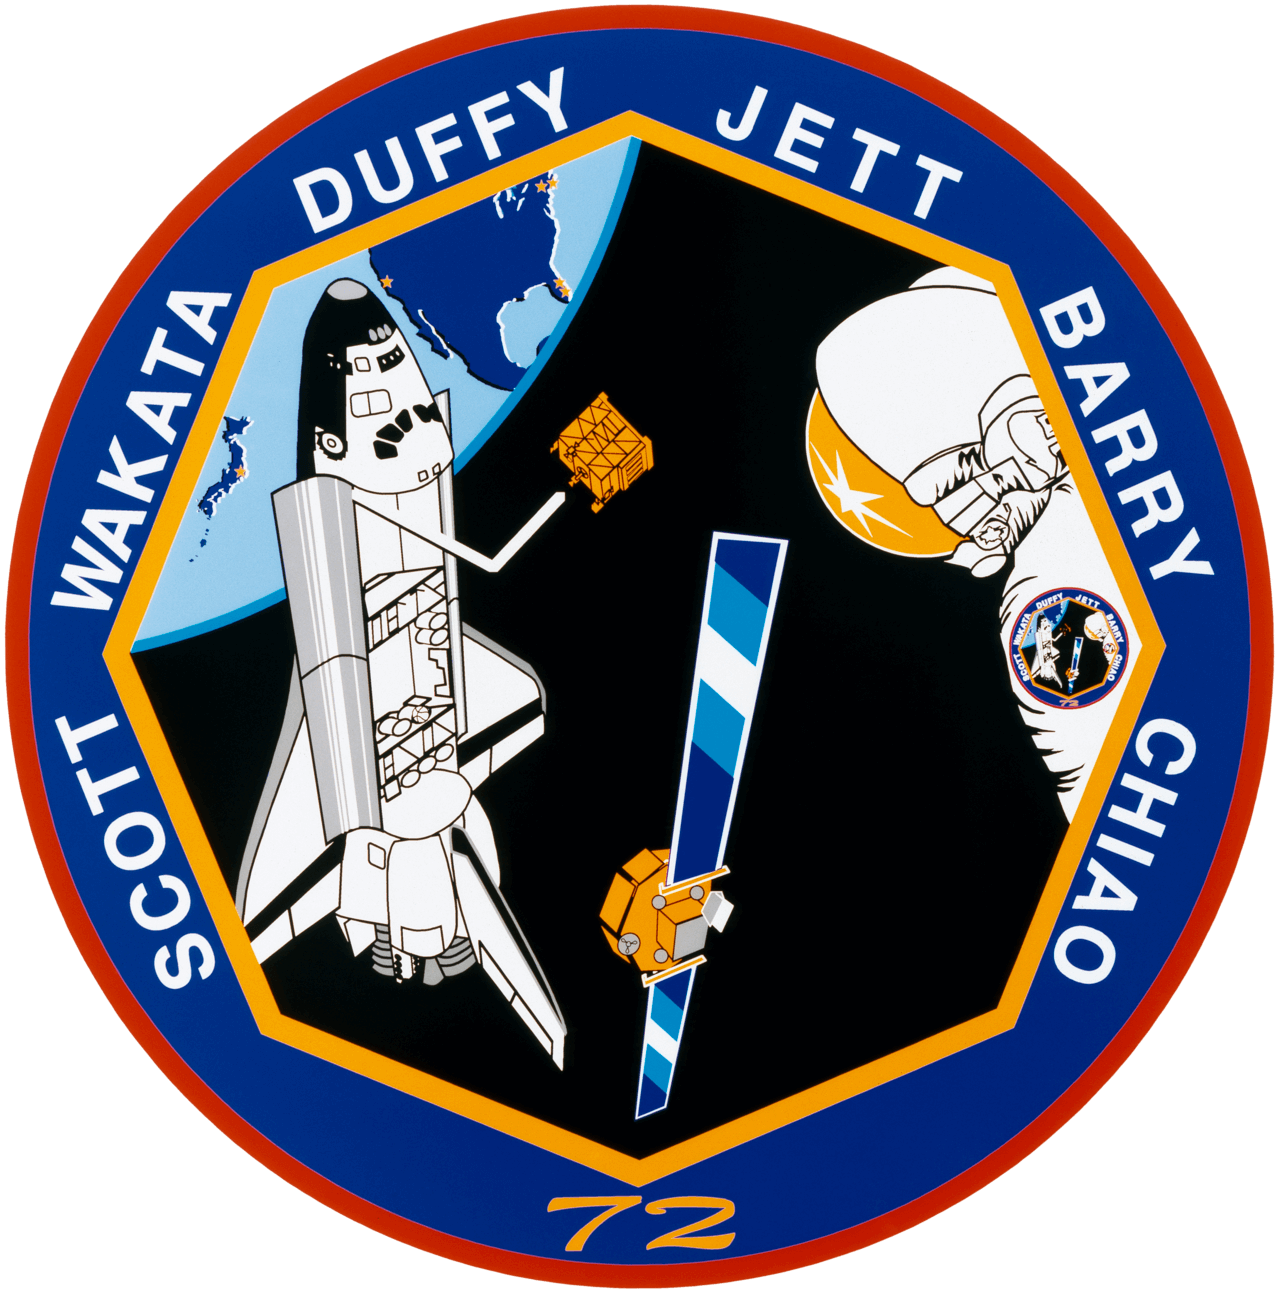 Mission patch for STS-72